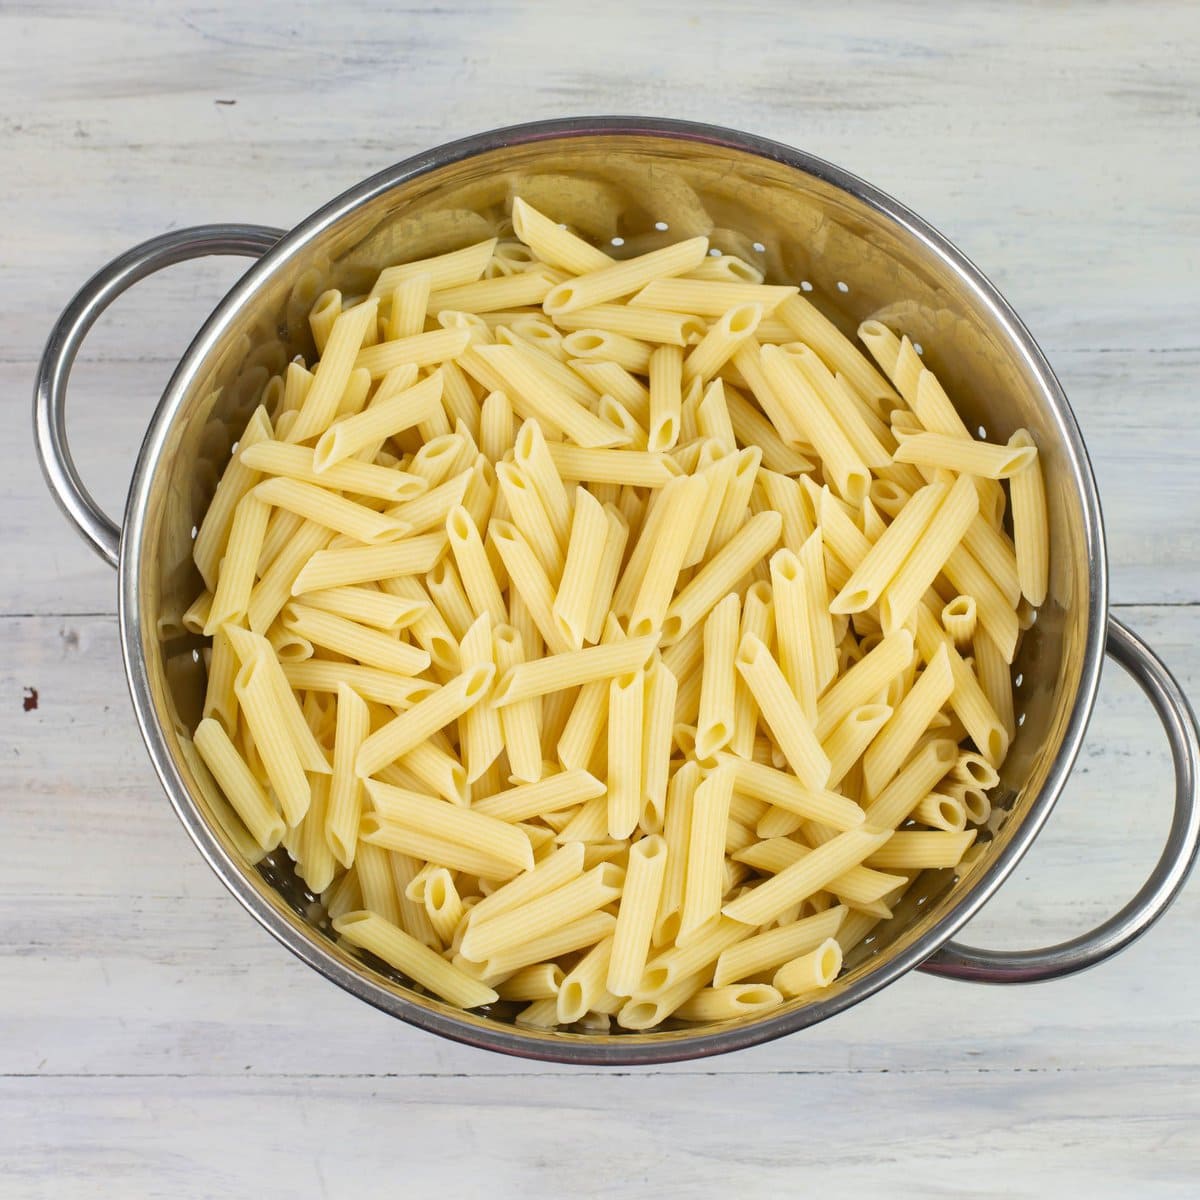 Cooked Penne Rigate pasta in a metal colander.